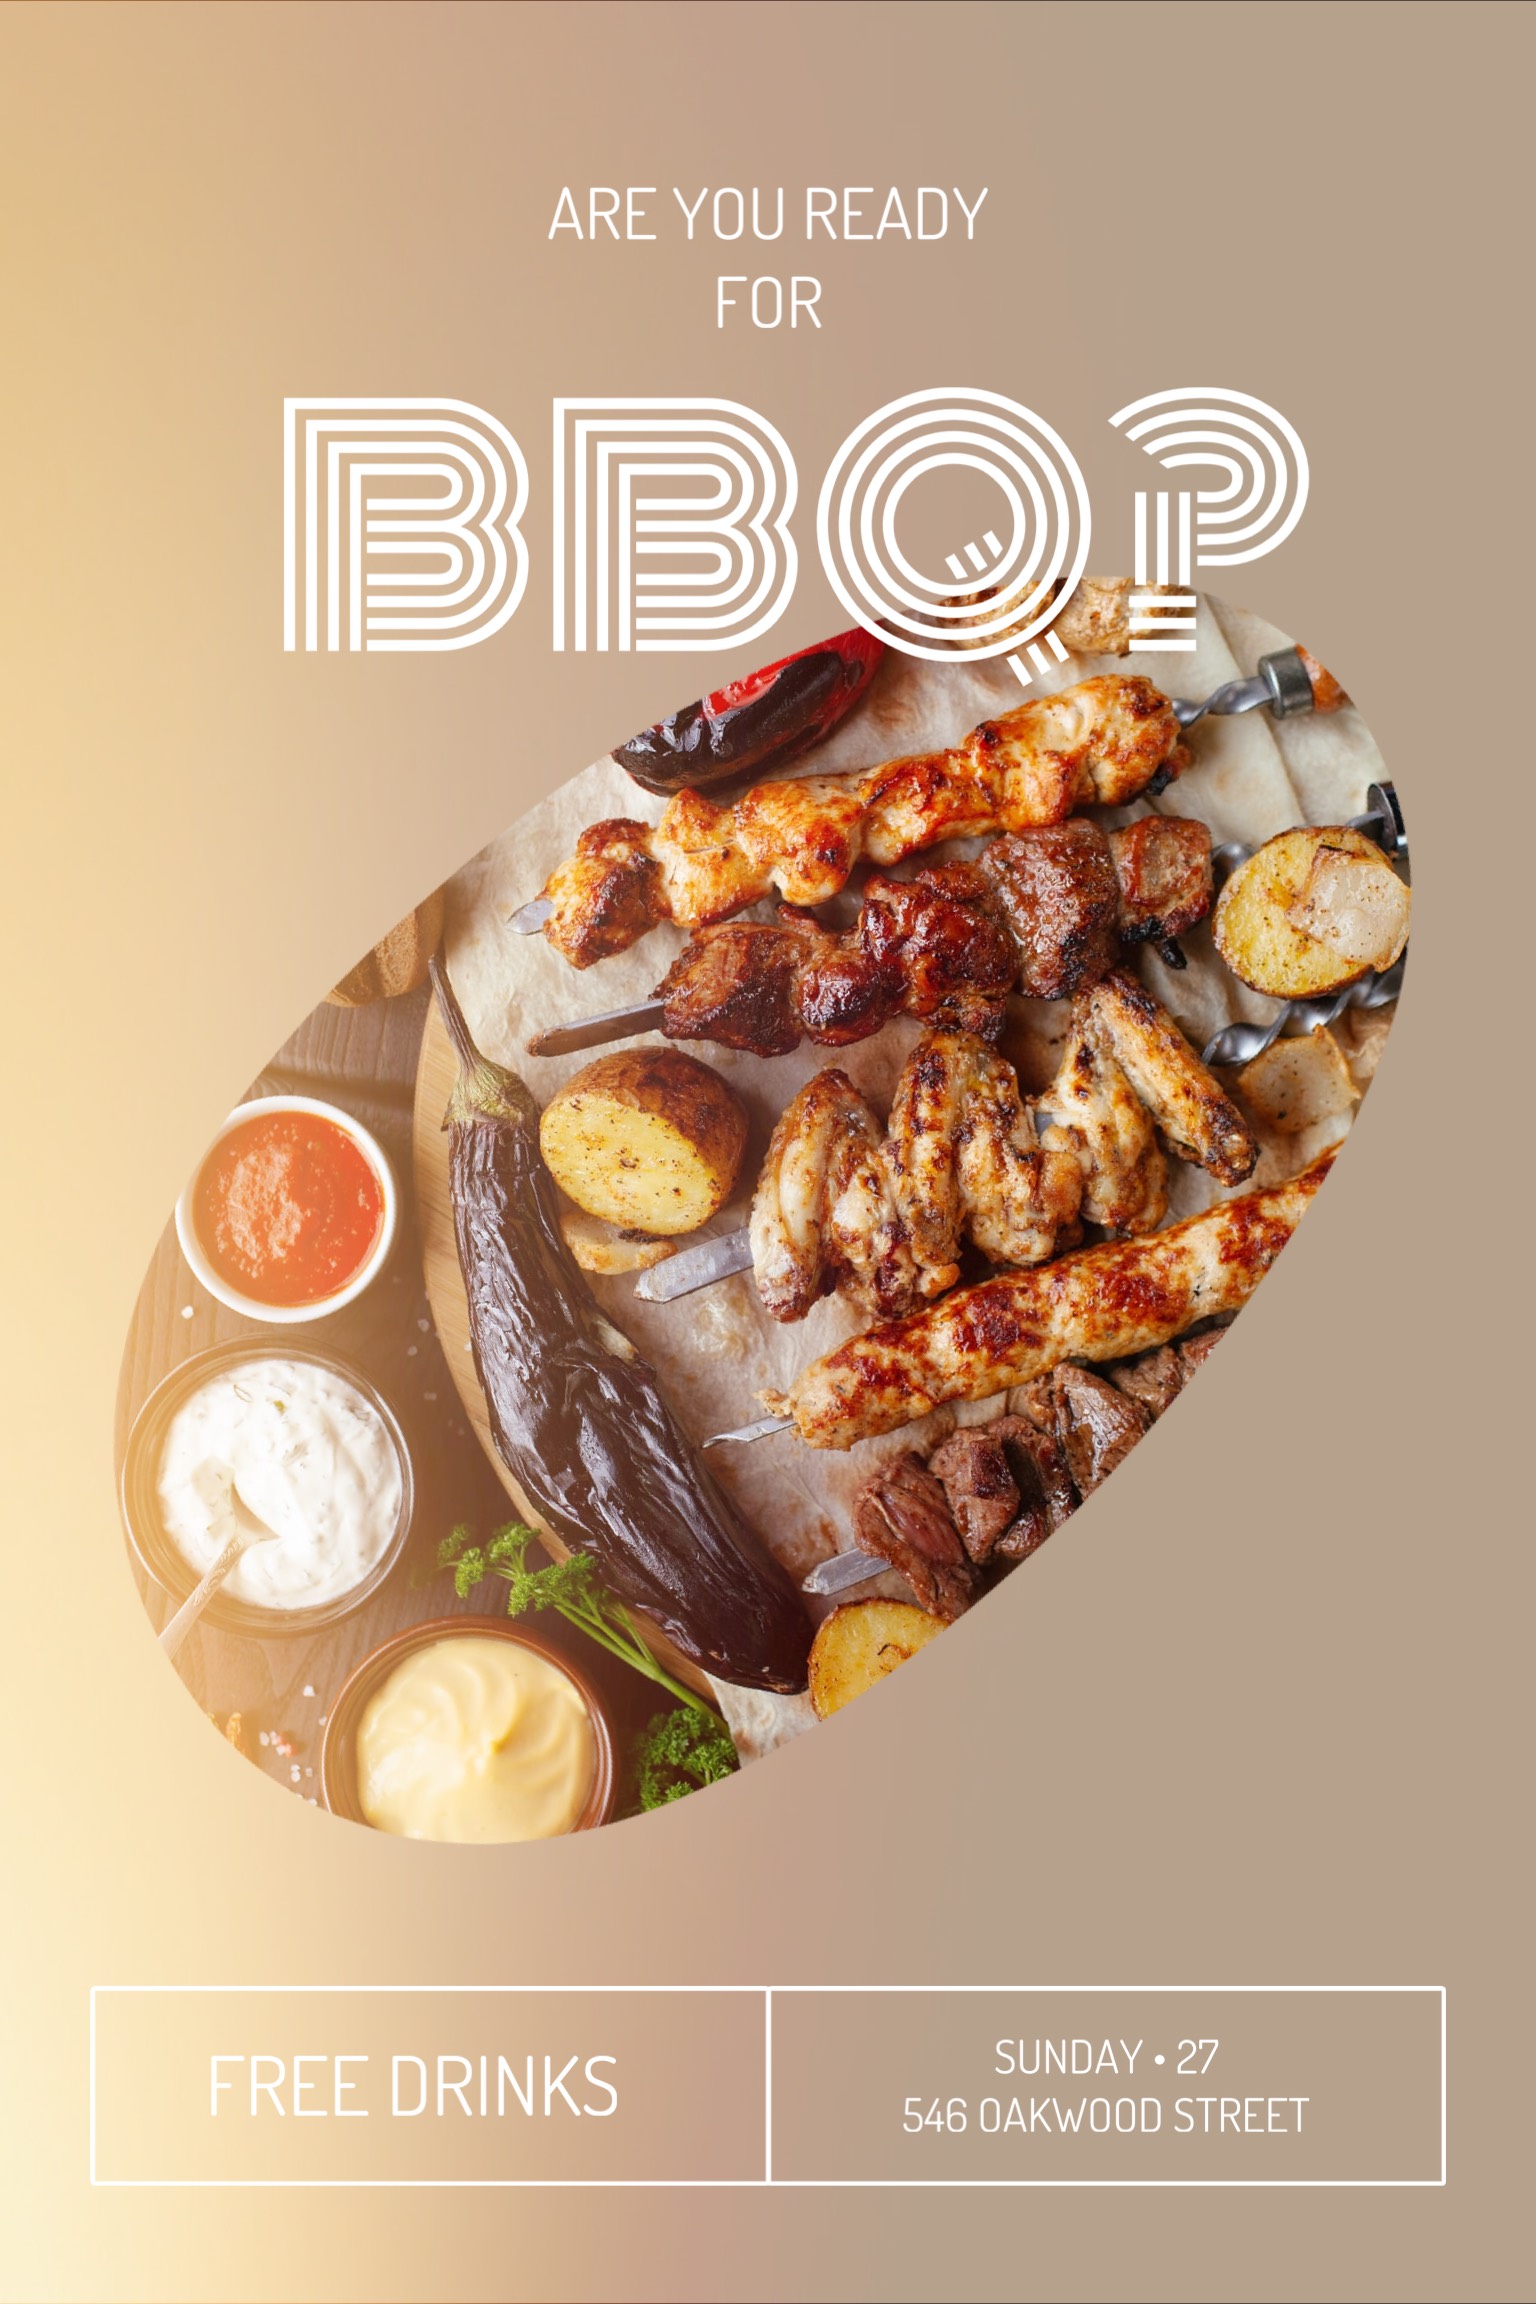 Are you ready for BBQP food invitation template